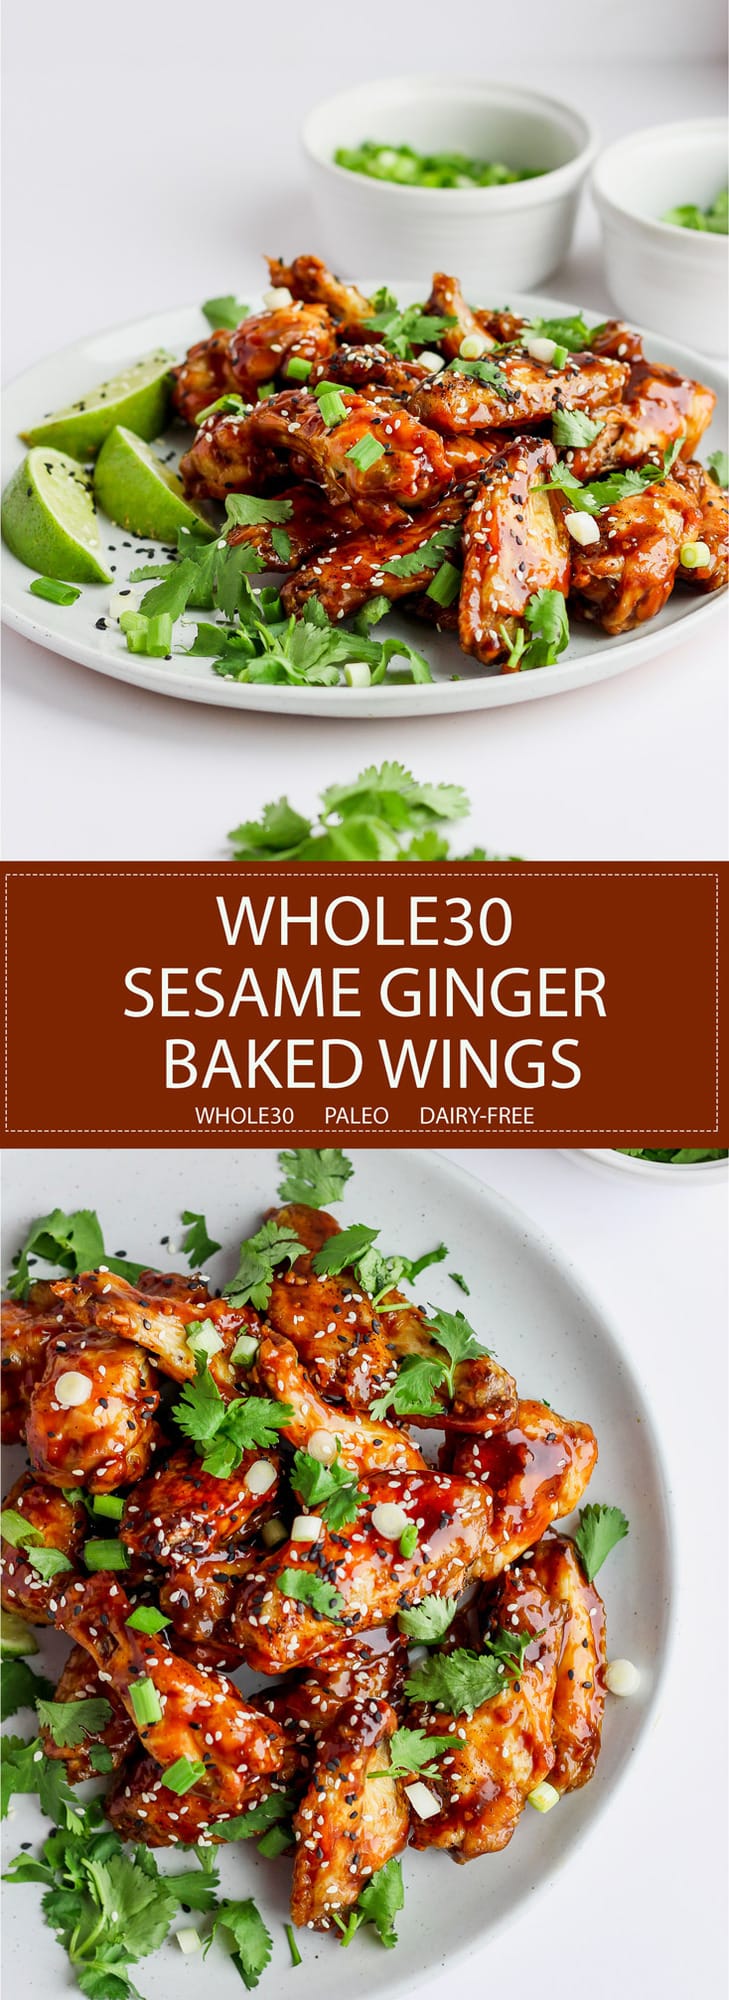 Easy Sesame Ginger Baked Wings - the perfect game day food that Whole30 and Paleo!